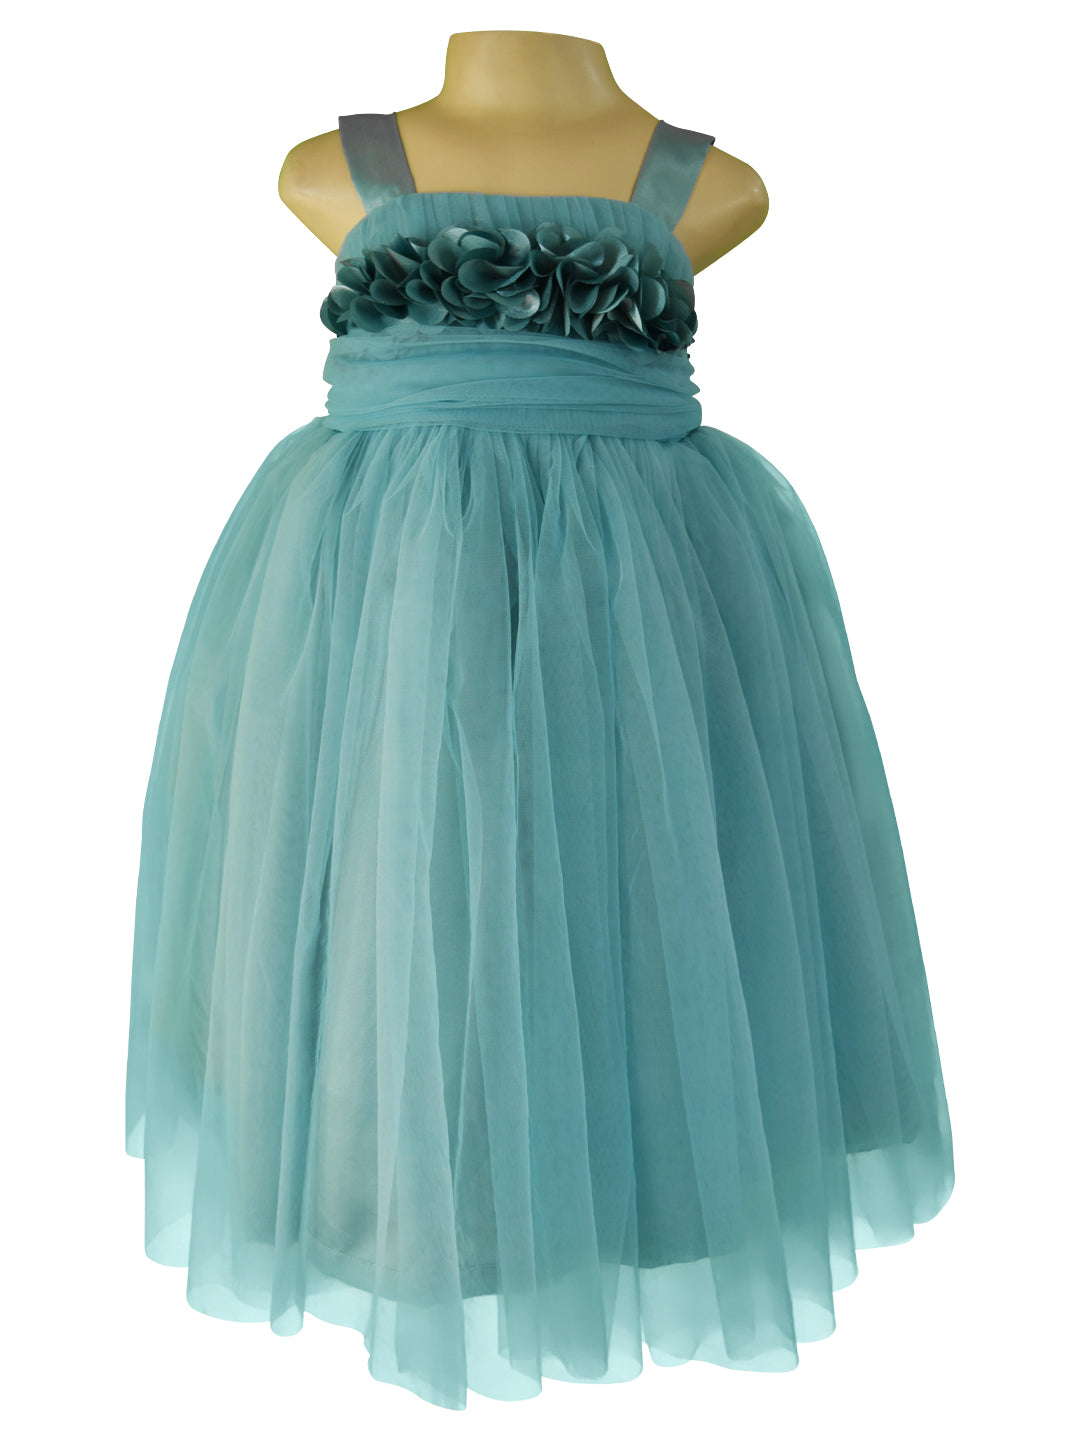 Gowns for Girls_Faye Aegean Teal Floral Gown